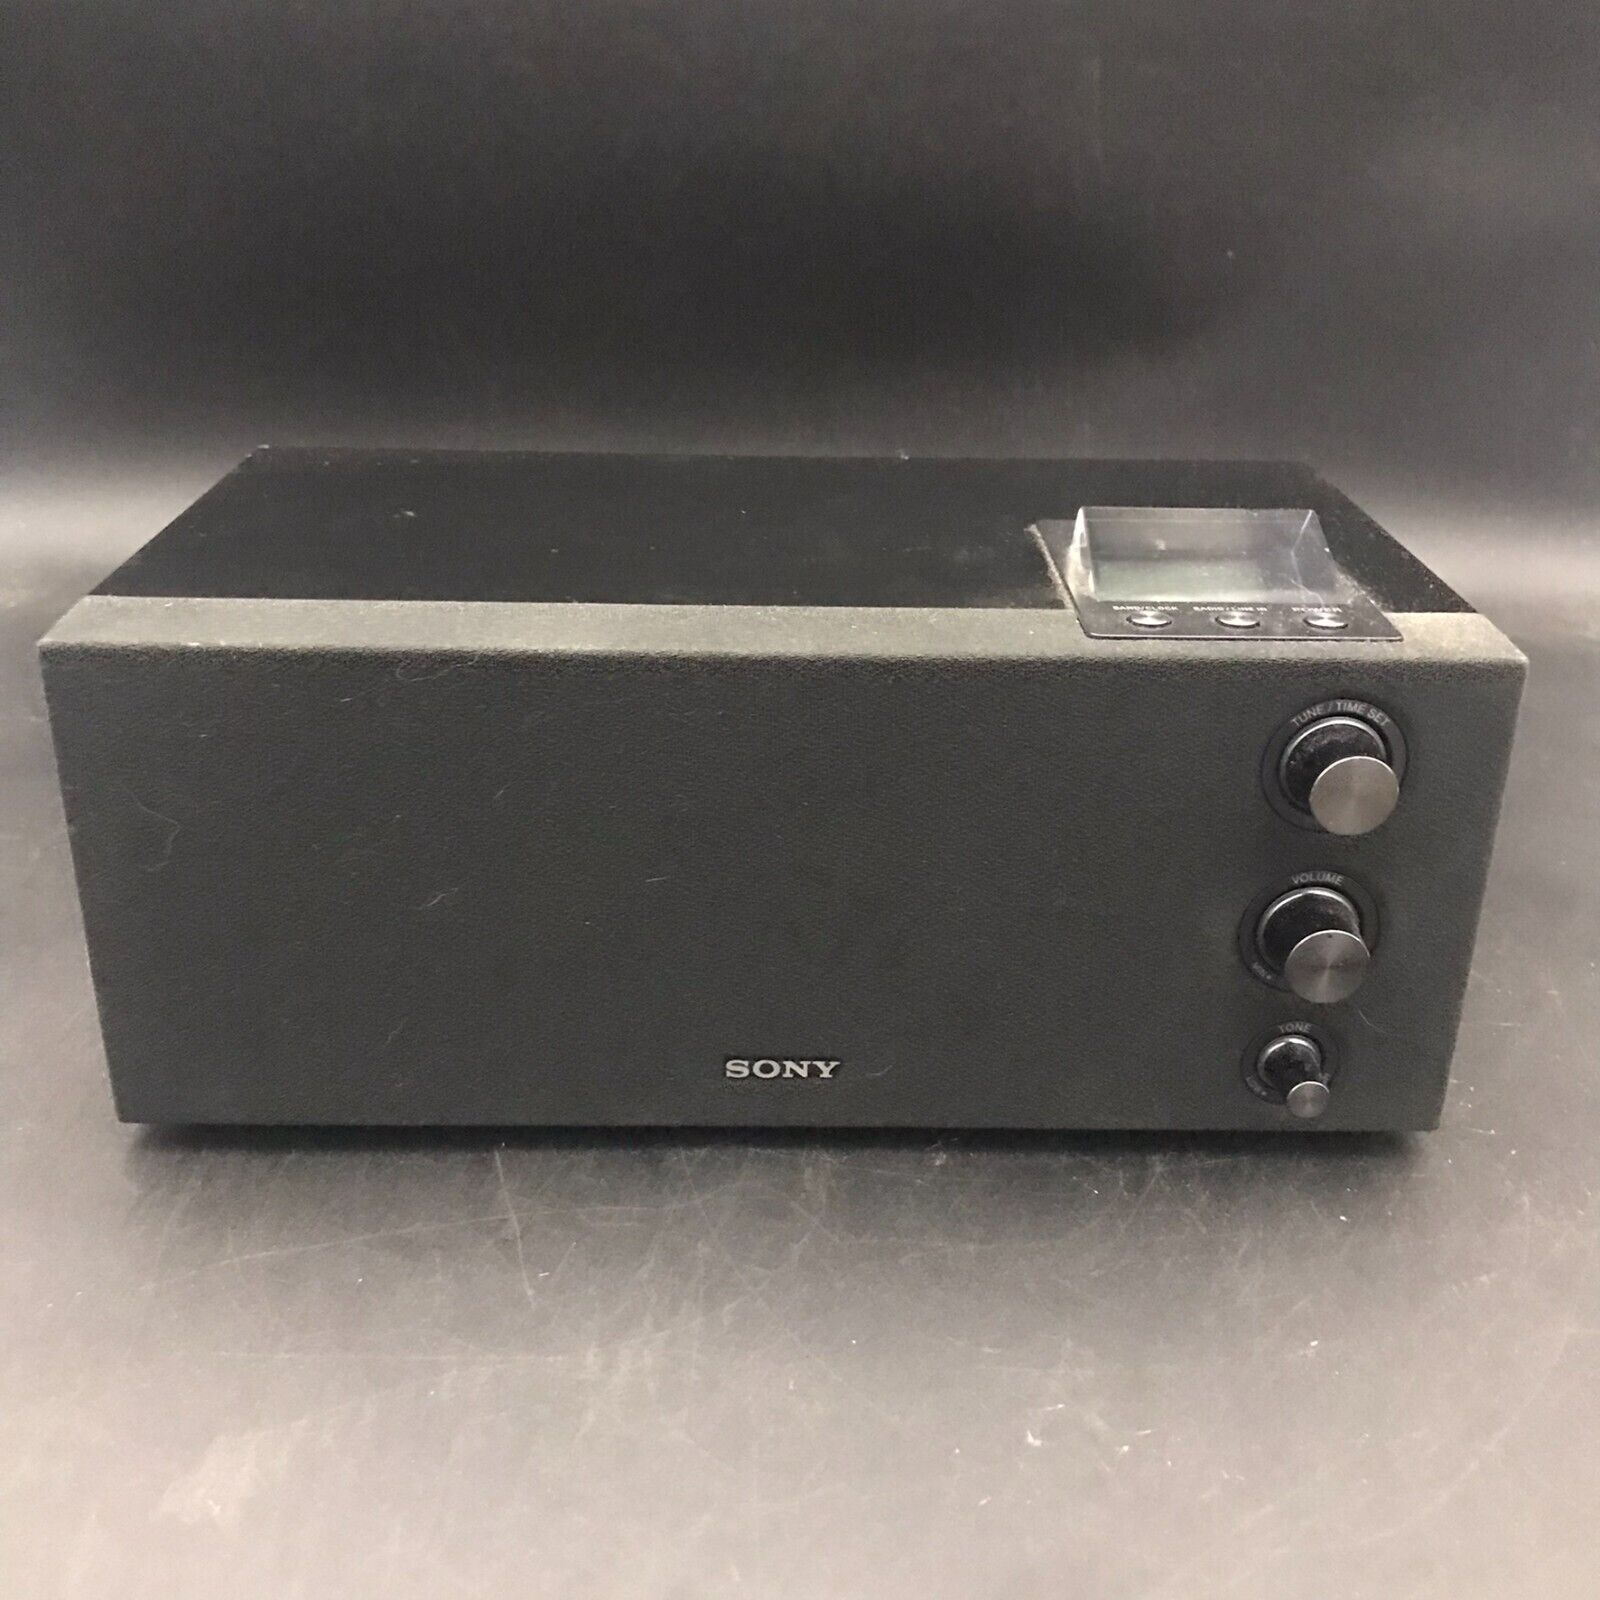 Sony Model ICF M1000 AM/FM Table Radio Sounds/Looks Great